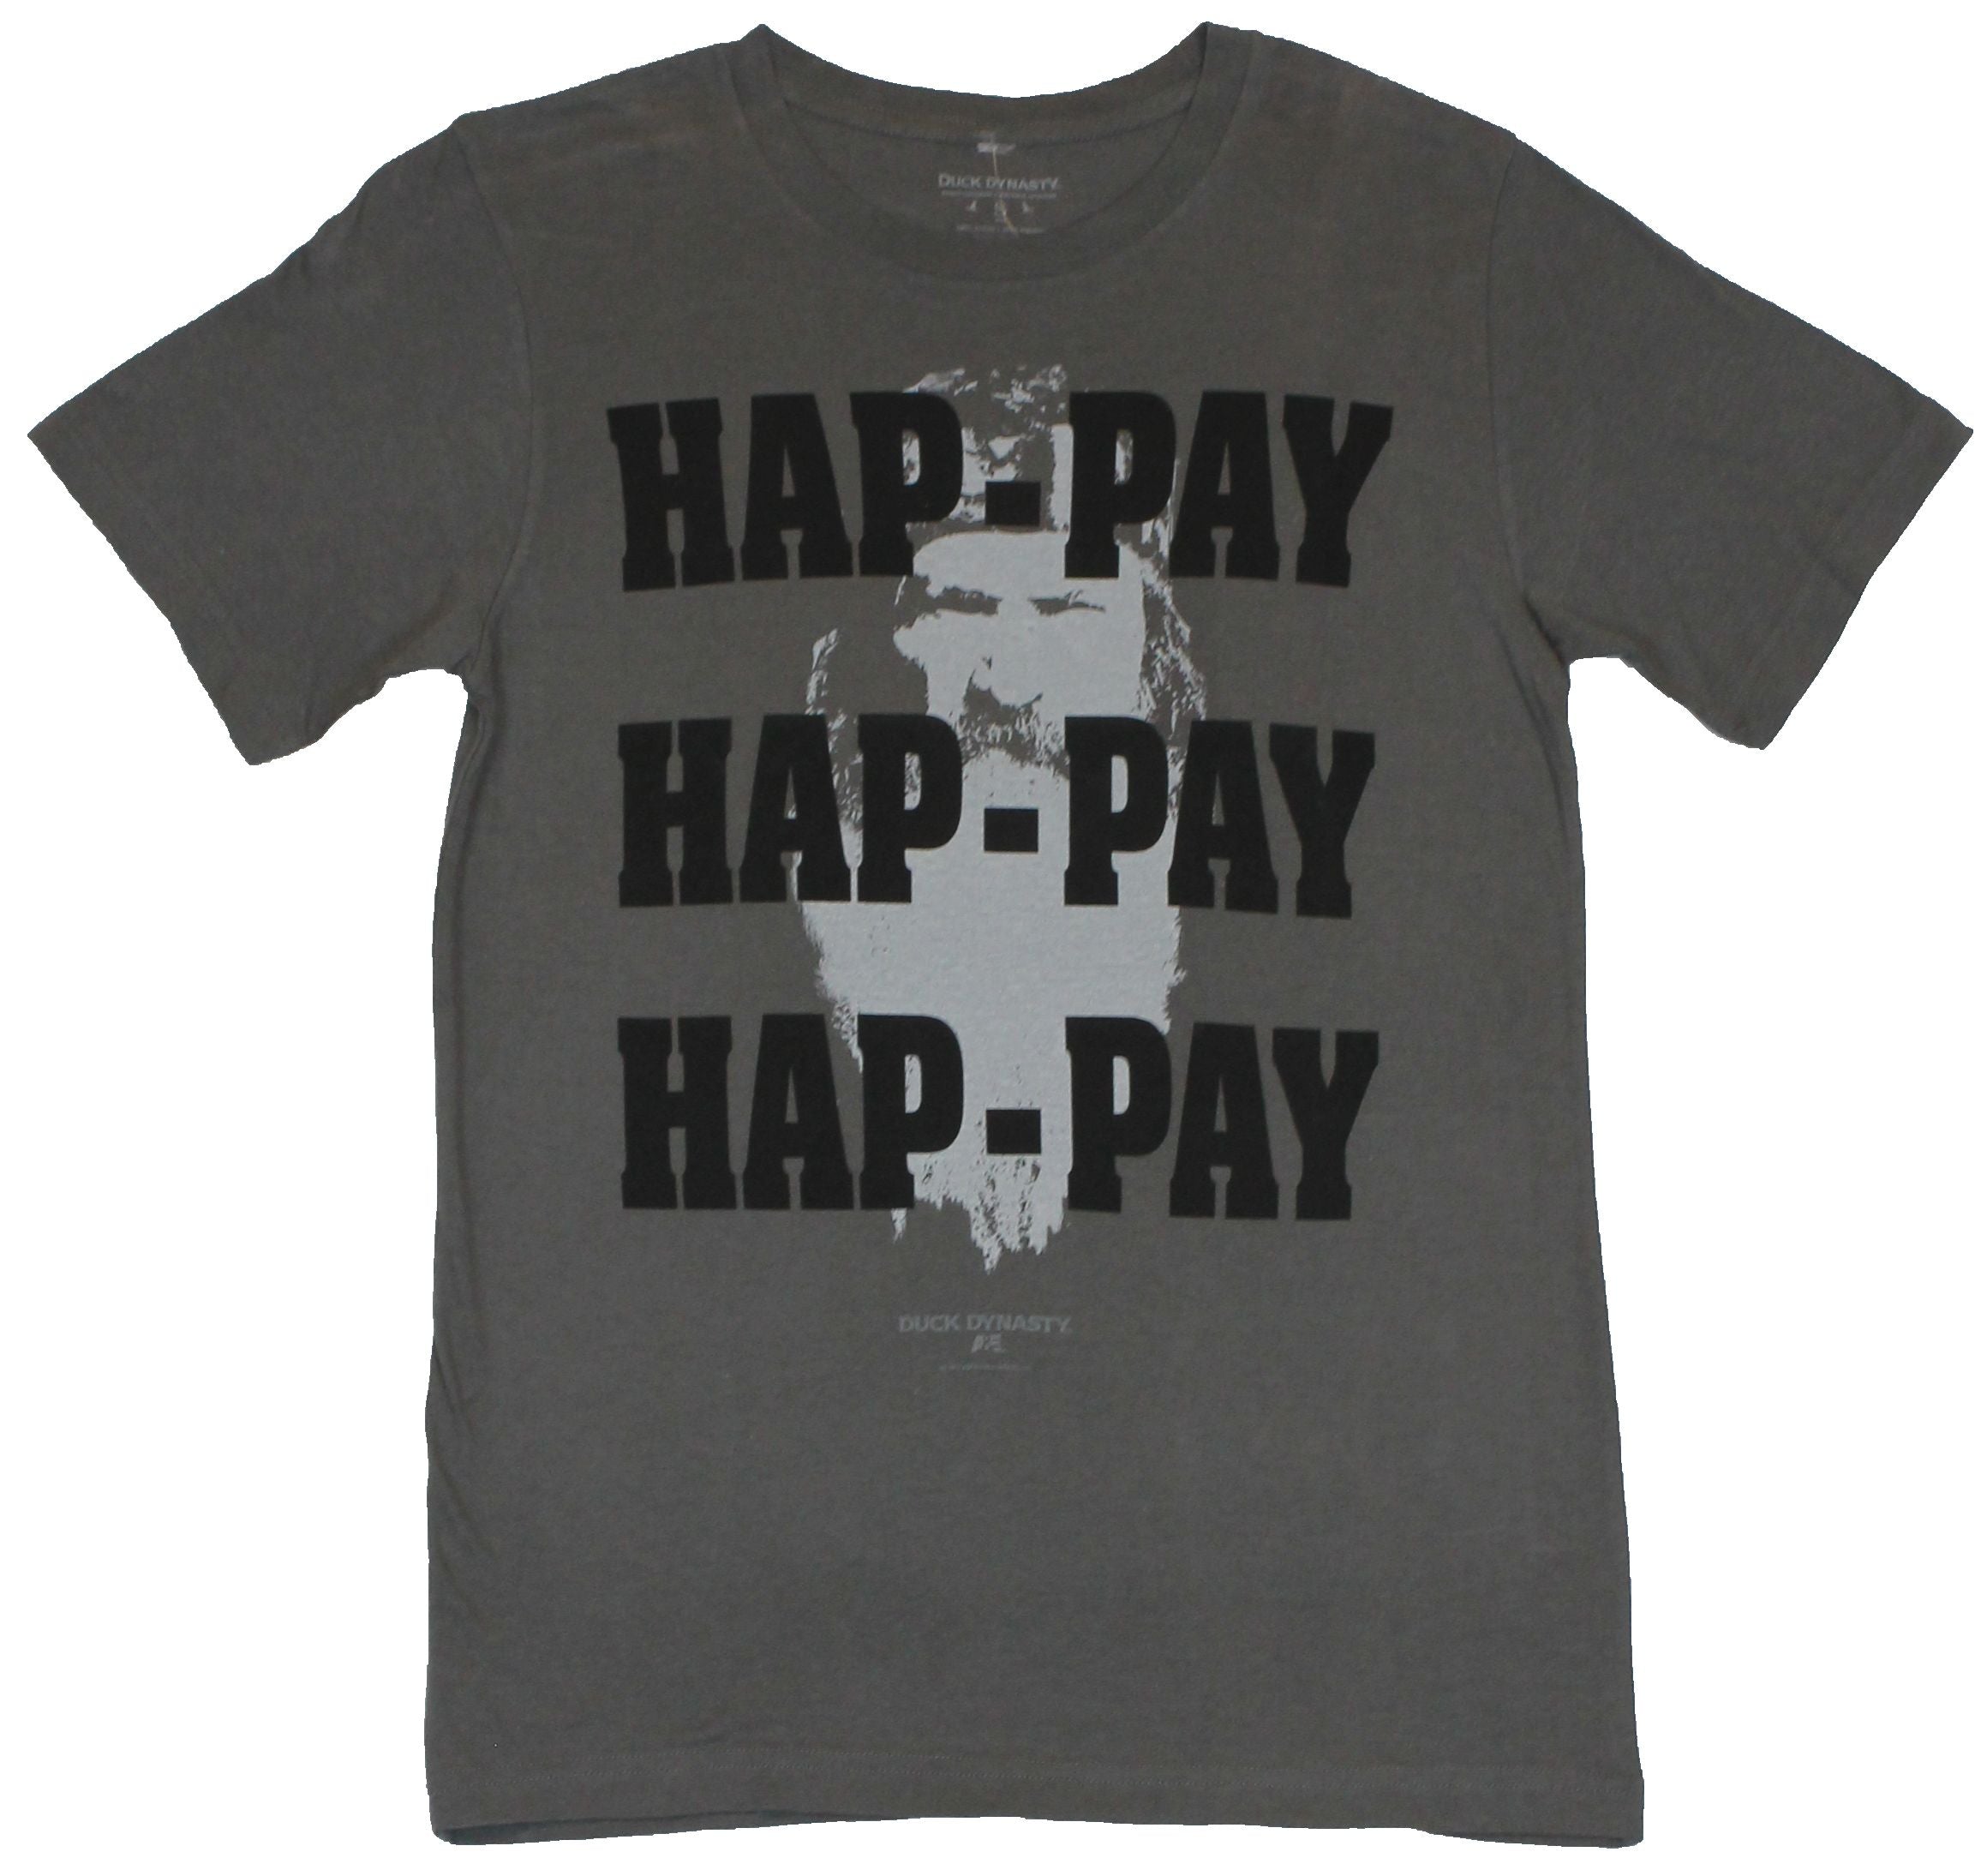 Duck Dynasty Mens T-Shirt - Happy Happy Happy Grayed Out Phil Robertson Image